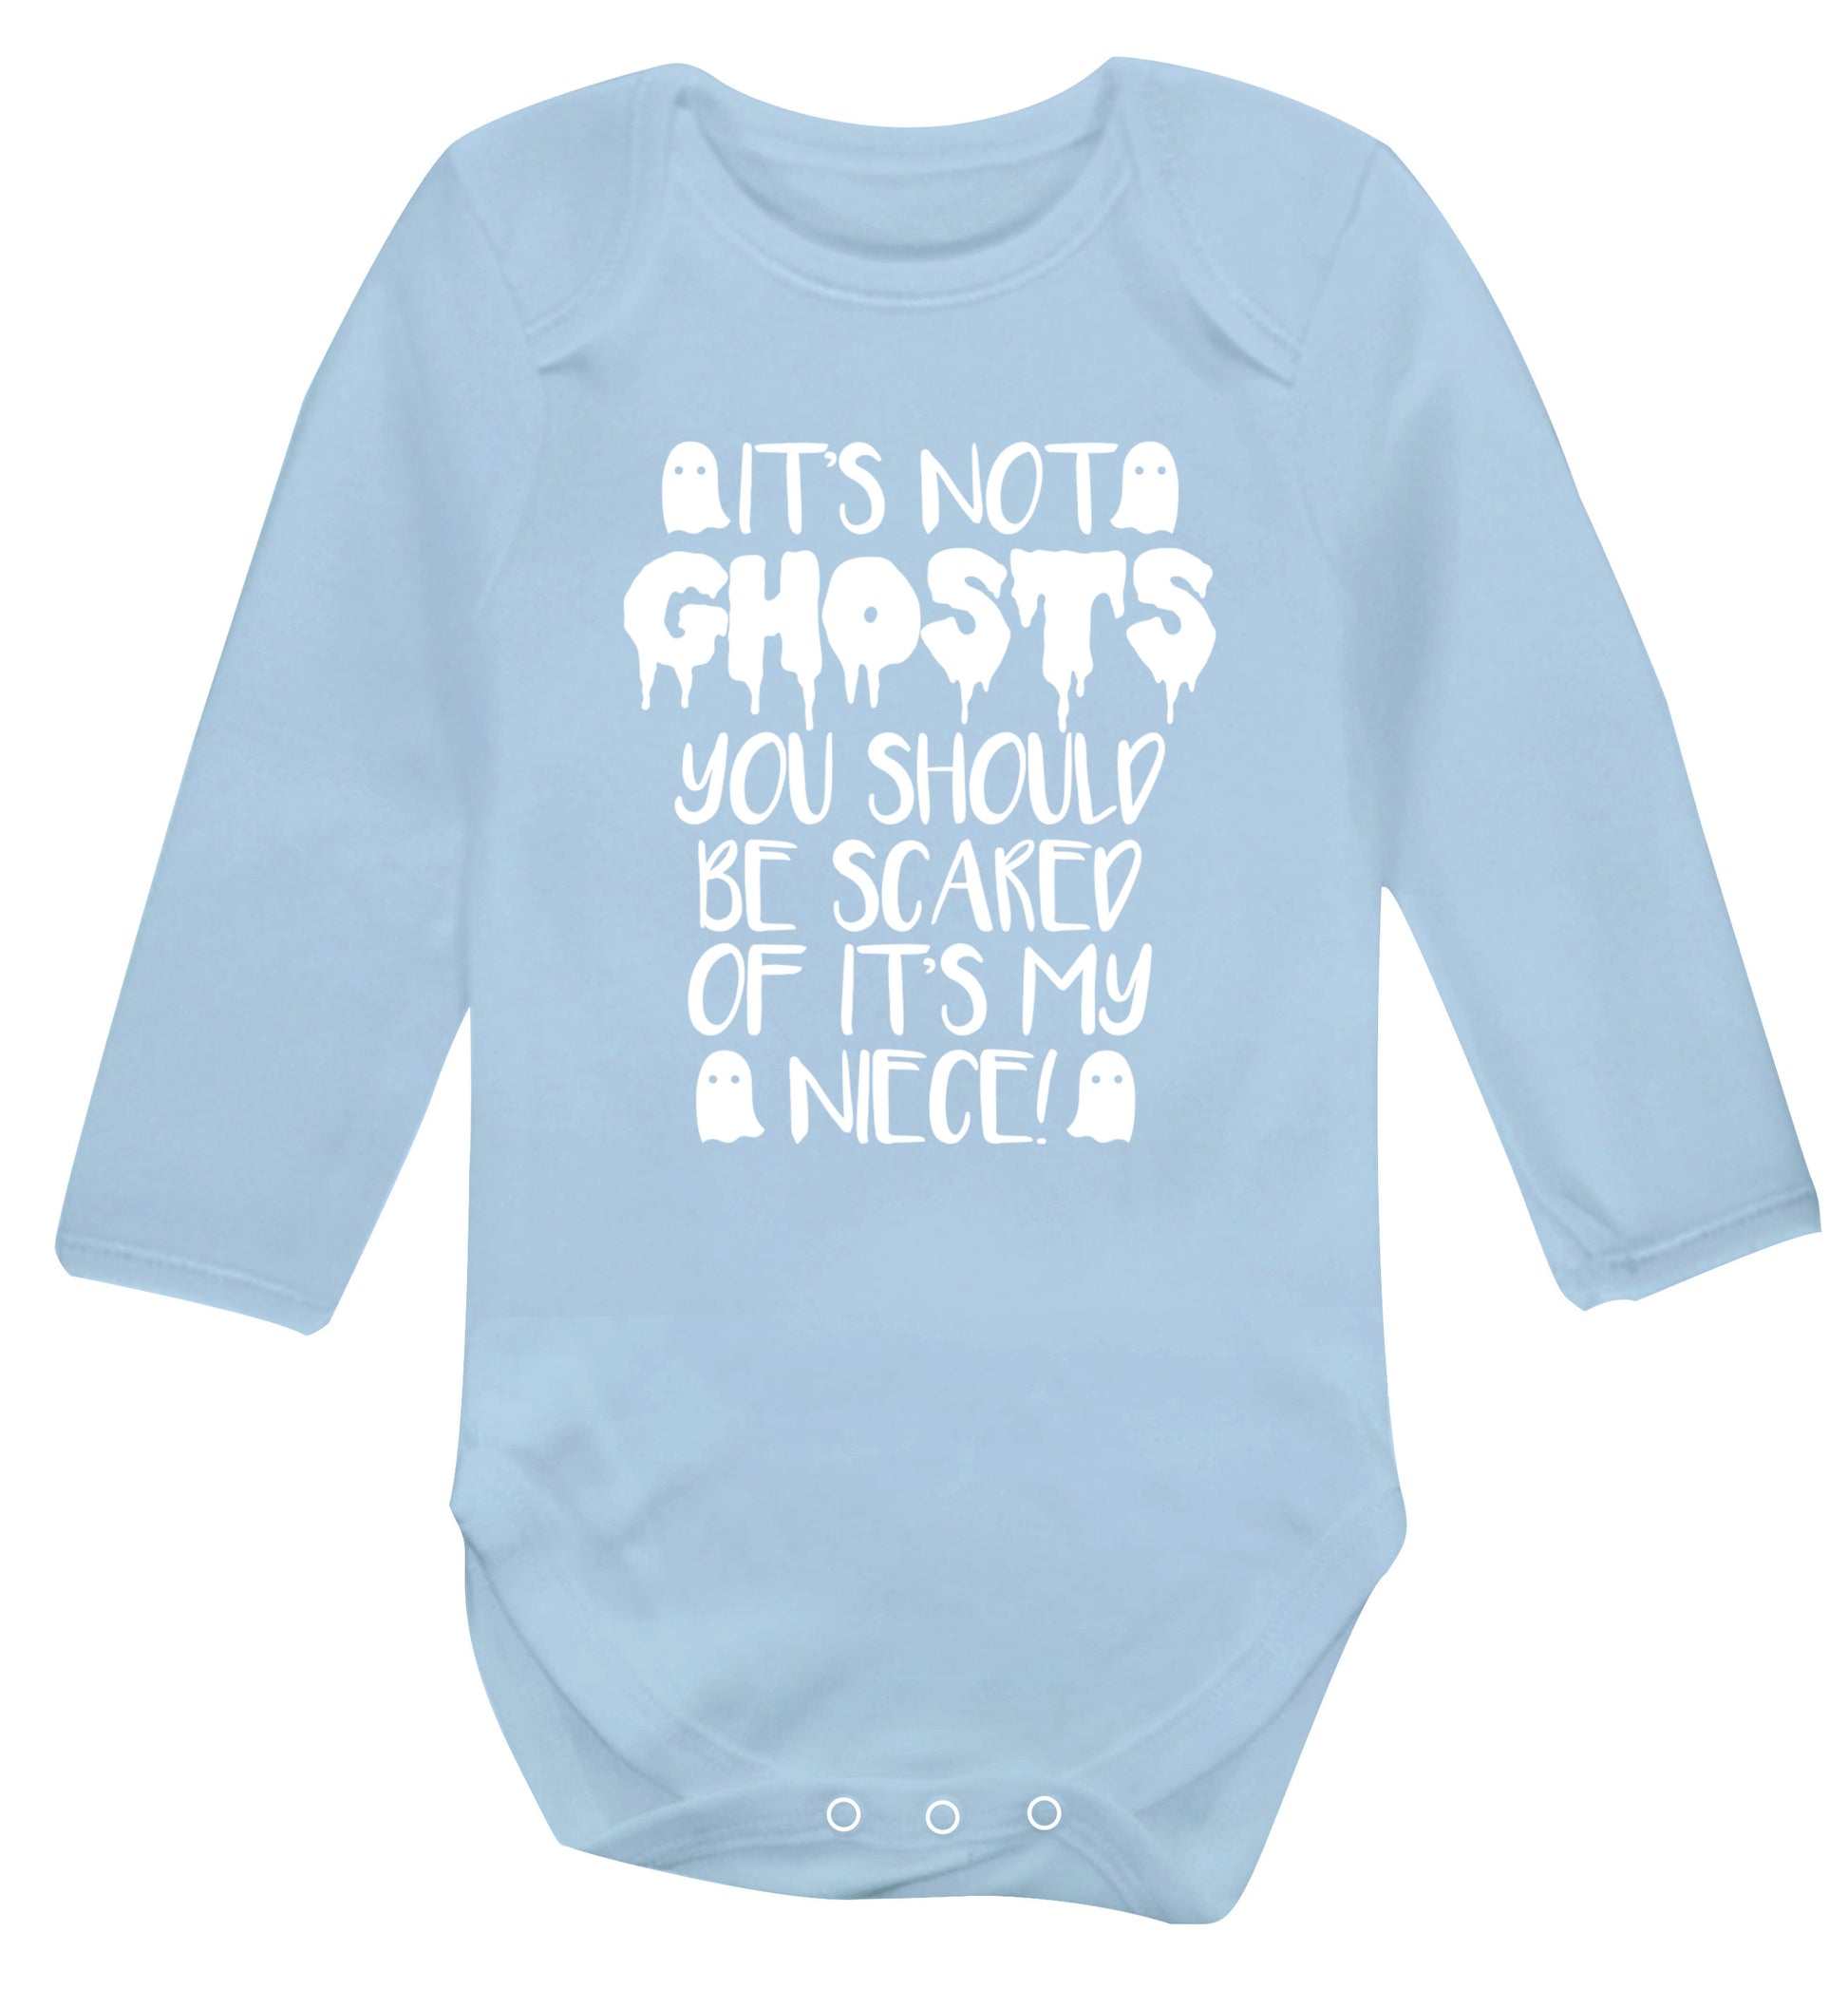 It's not ghosts you should be scared of it's my niece! Baby Vest long sleeved pale blue 6-12 months